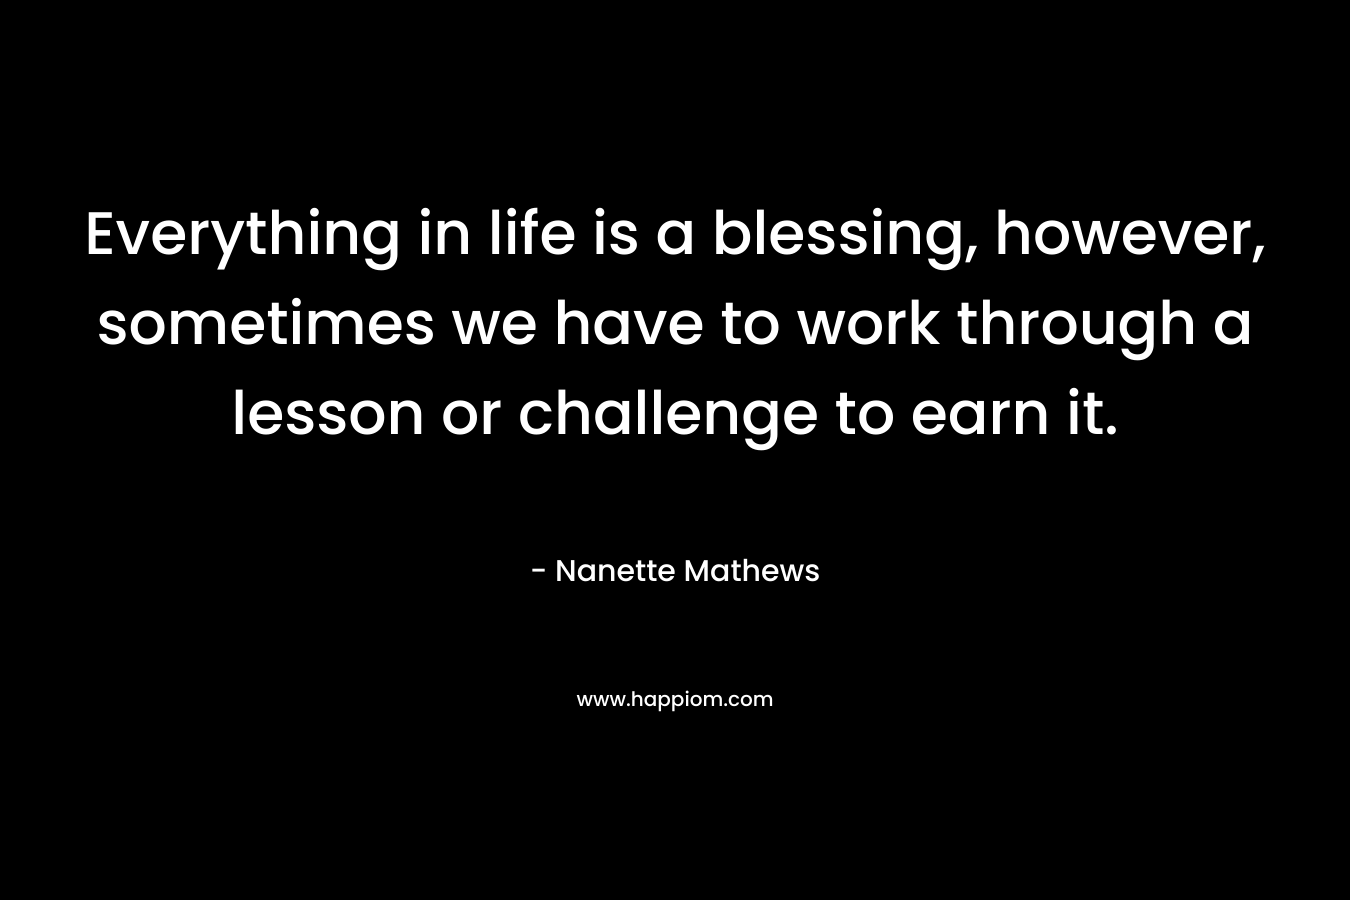 Everything in life is a blessing, however, sometimes we have to work through a lesson or challenge to earn it. – Nanette Mathews